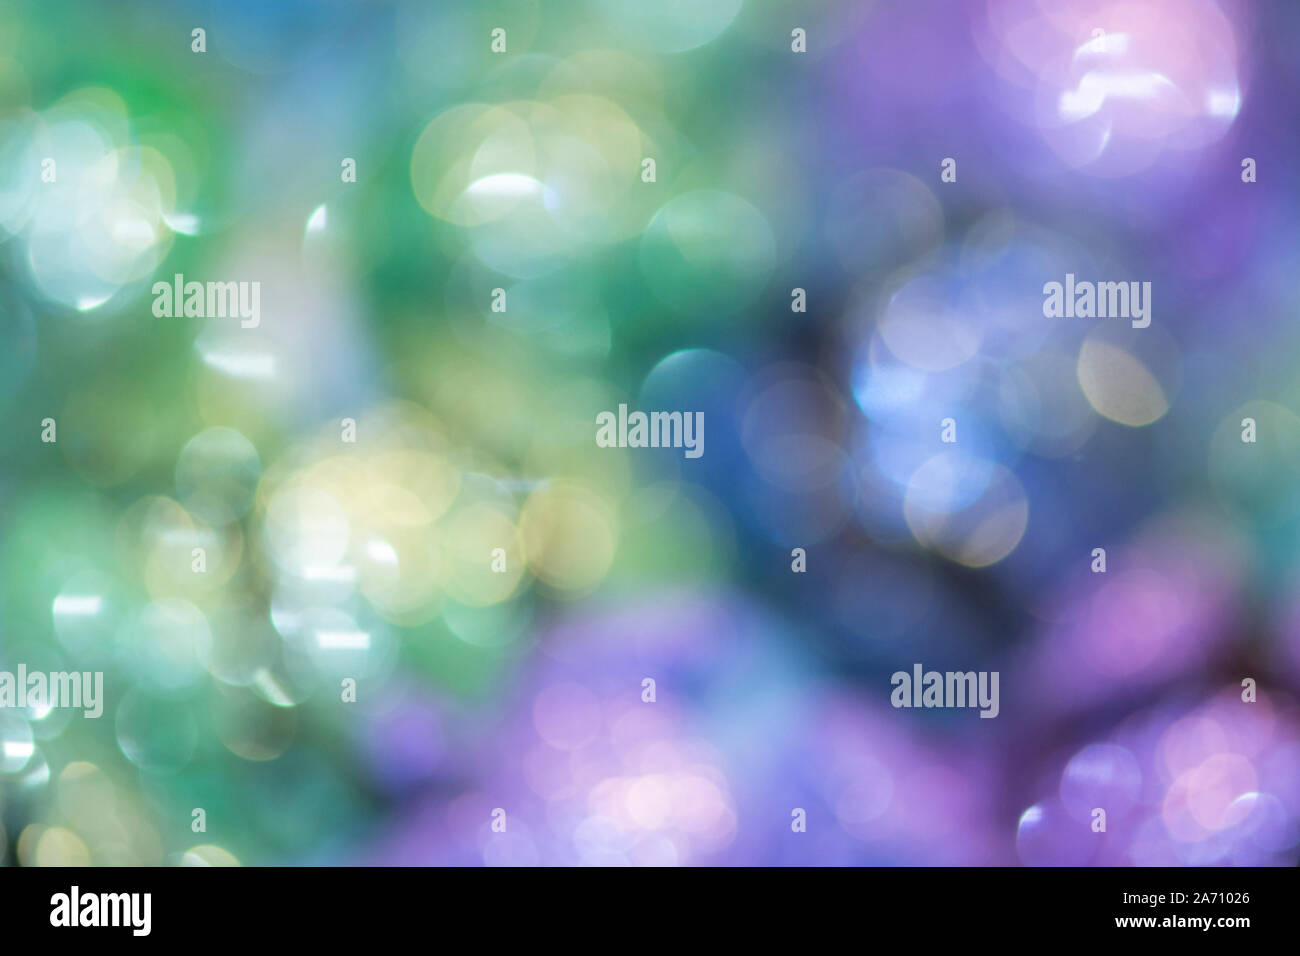 Abstract background of blurry unfocus lights Stock Photo